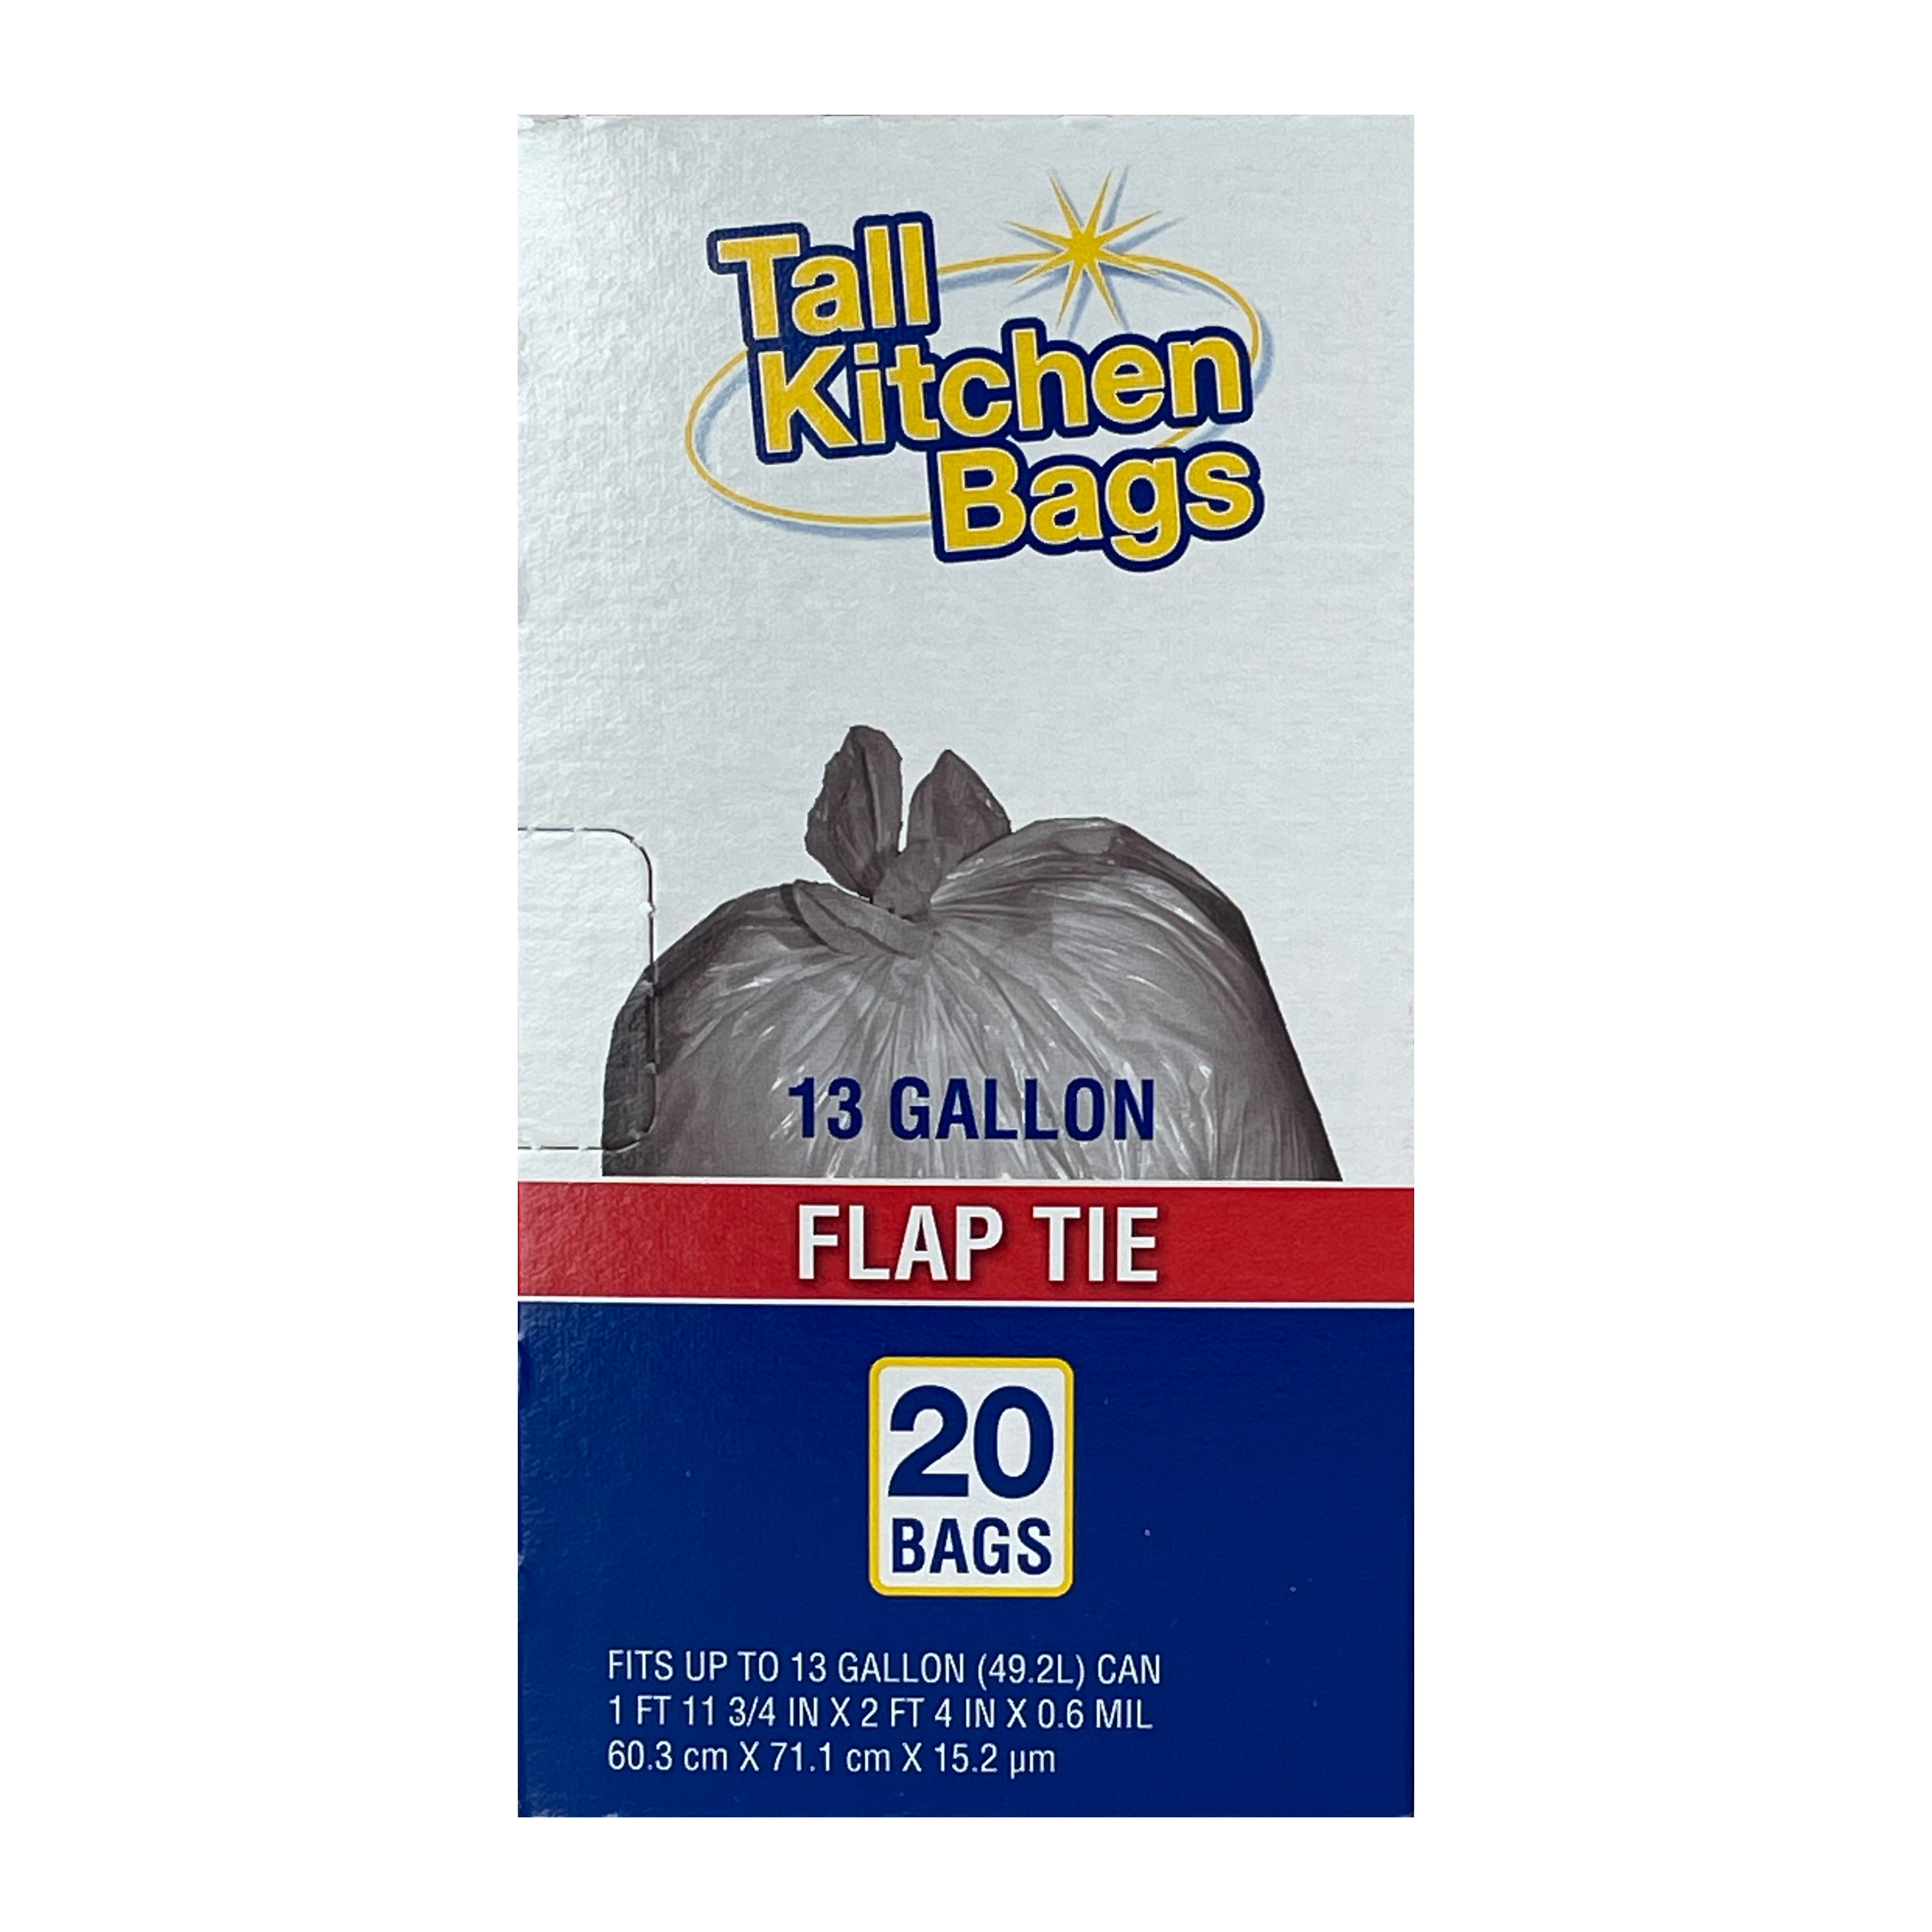 Life Goods 4 Flap Tie Tall Kitchen Bags 13 Gallon - 15 CT 12 Pack